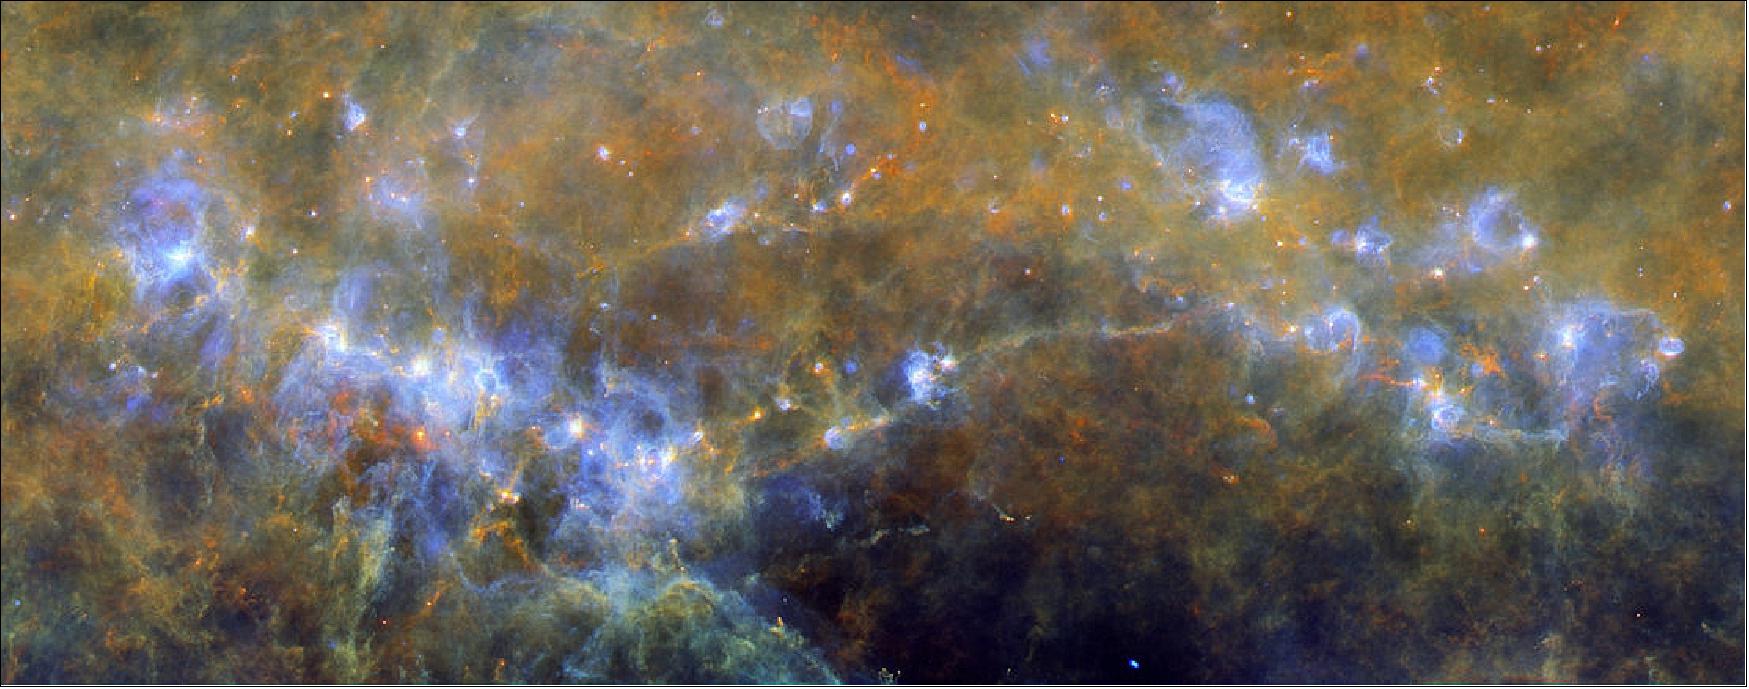 Figure 37: Stars are bursting into life all over this image from ESA’s Herschel space observatory. It depicts the giant molecular cloud RCW106, a massive billow of gas and dust almost 12 000 light-years away in the southern constellation of Norma, the Carpenter's Square (image credit: ESA/Herschel/PACS, SPIRE/Hi-GAL Project. Acknowledgement: UNIMAP / L. Piazzo, La Sapienza – Università di Roma; E. Schisano / G. Li Causi, IAPS/INAF, Italy)